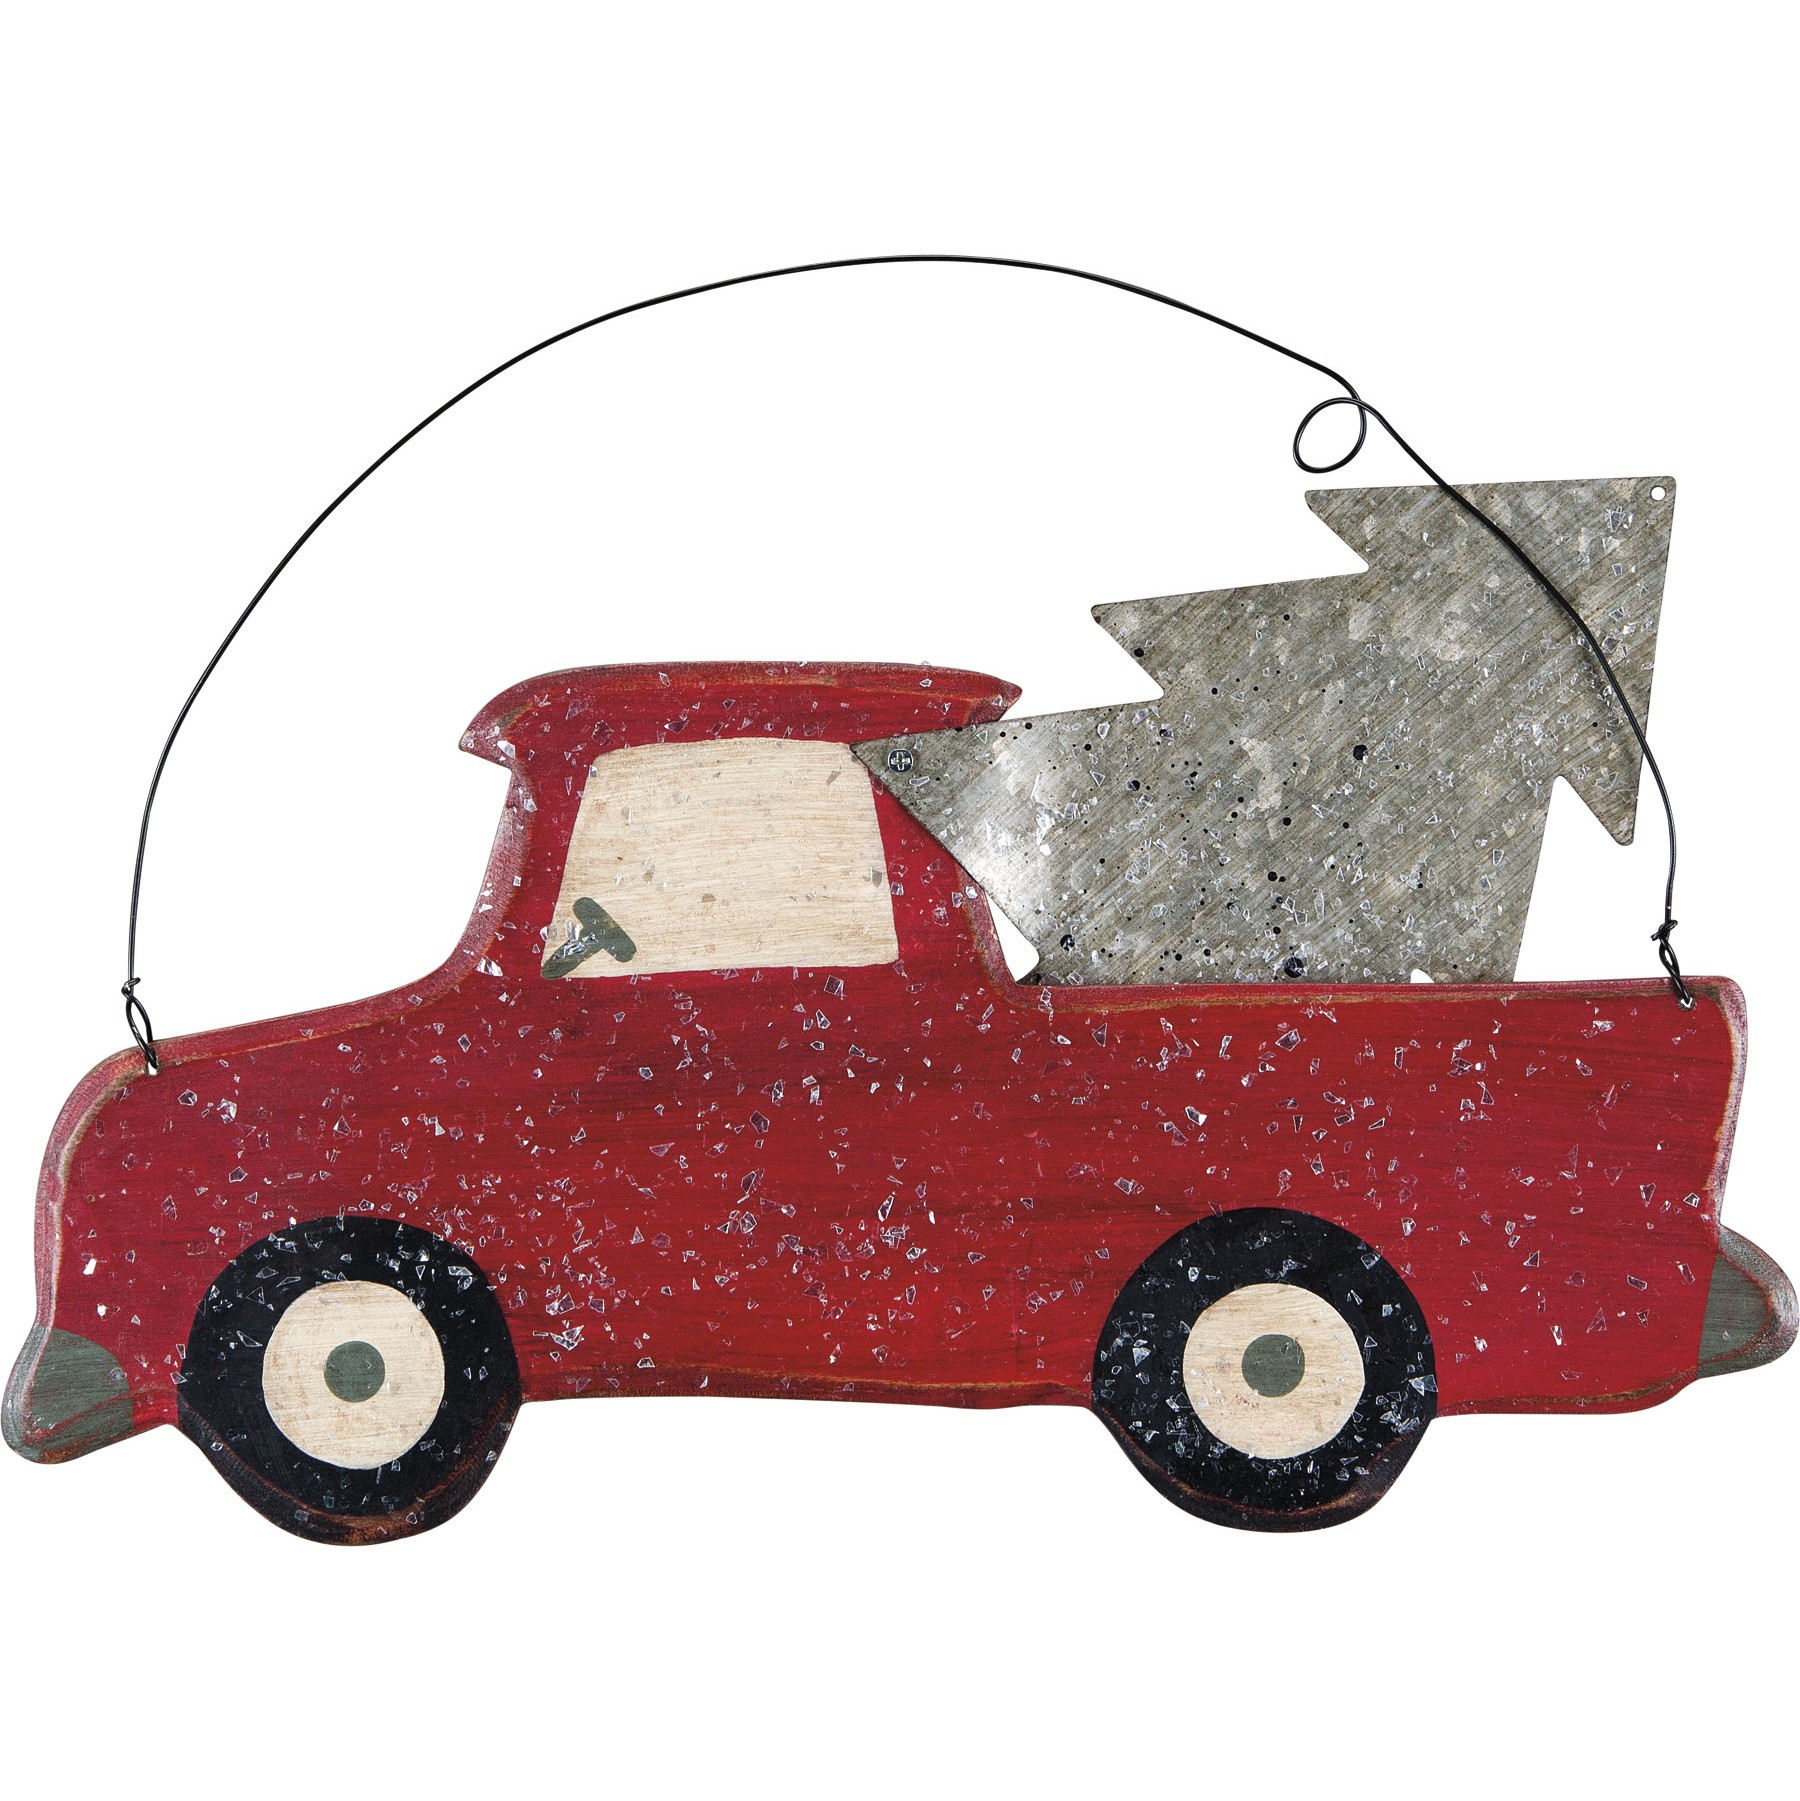 https://www.saltyhome.com/wp-content/uploads/2020/12/Red-truck-with-pine-christmas-galvanized-silver-tree-wall-decor-hanger-ornament-primitives-by-kathy-Phil-Chapman-883504239622-23962.jpg